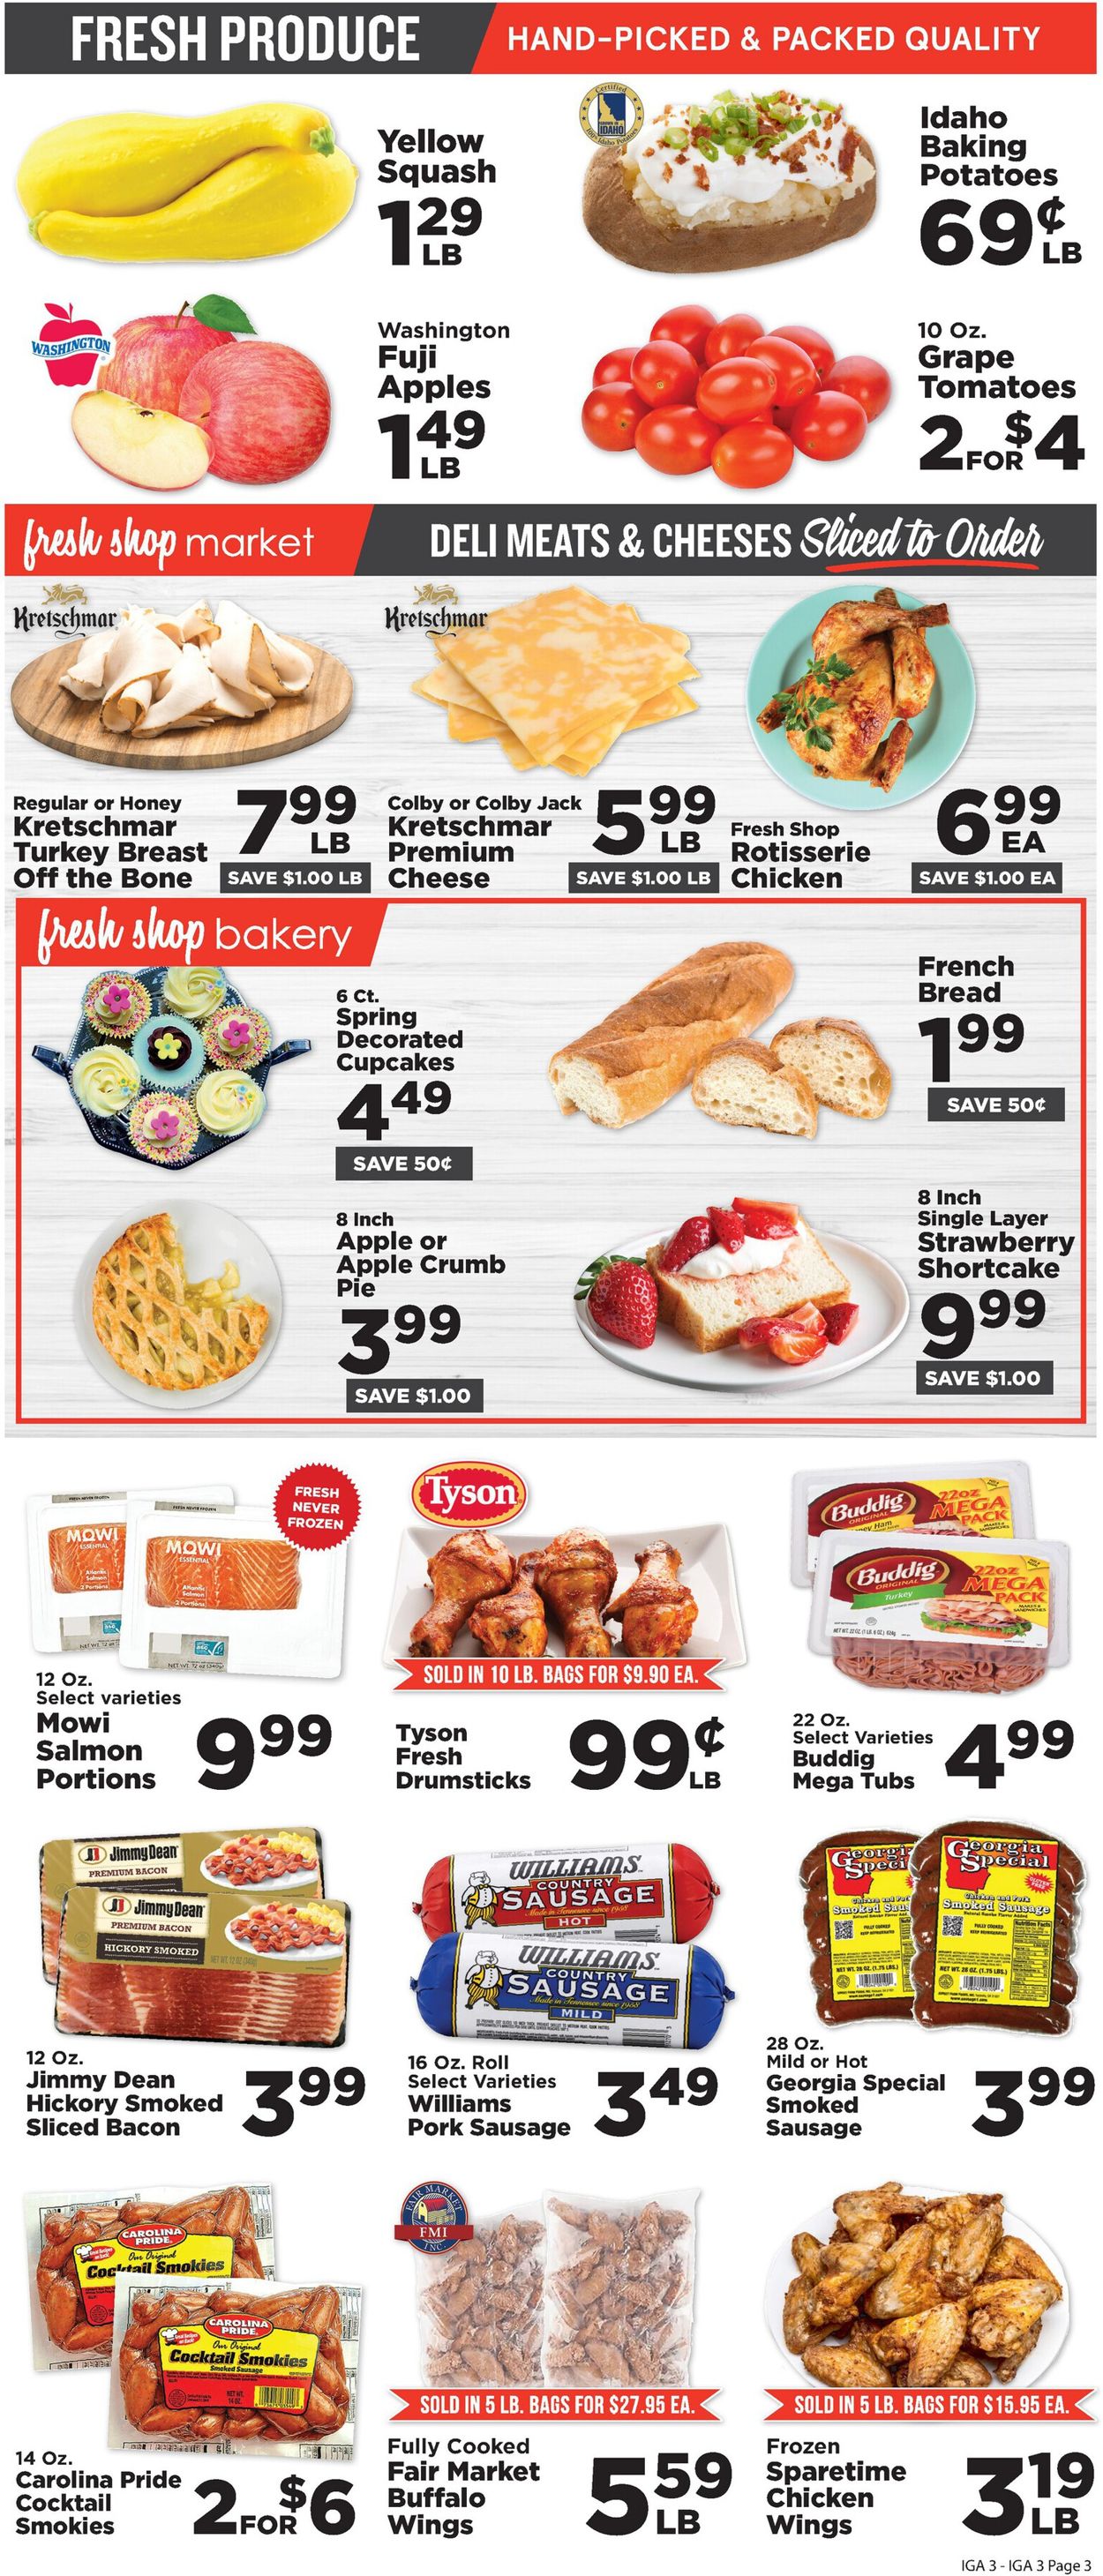 IGA Ad from 03/30/2022